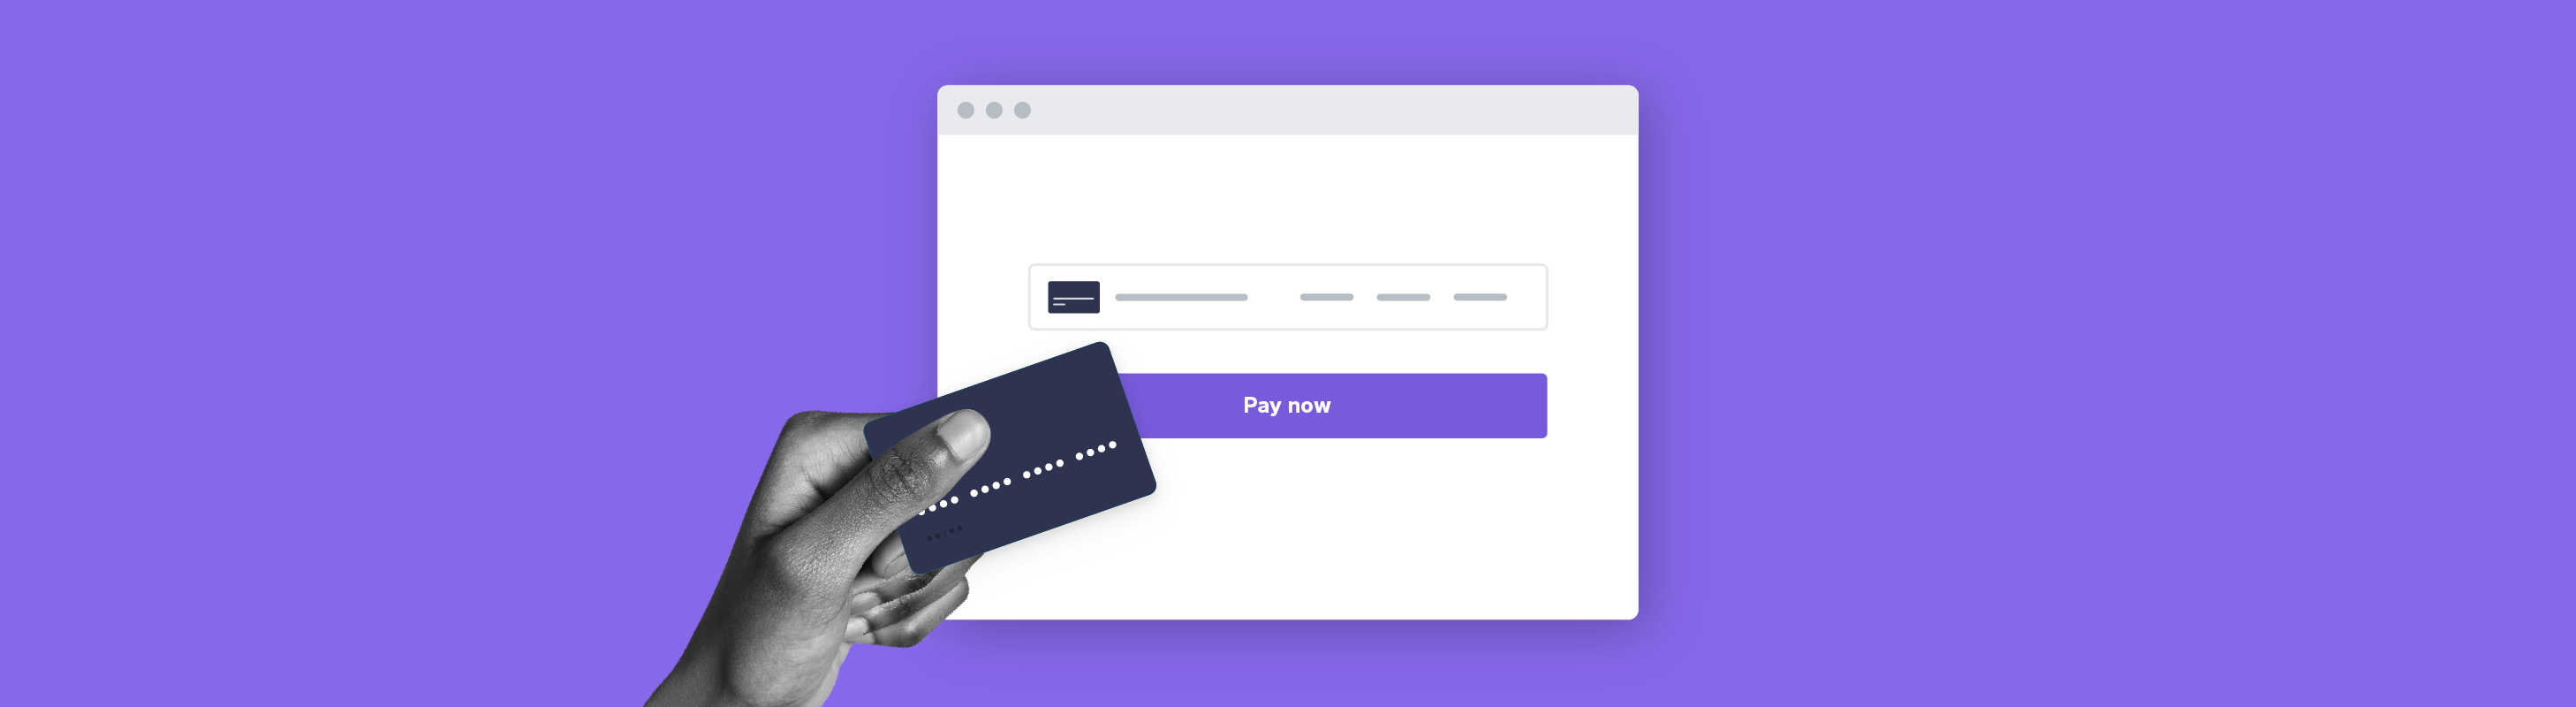 Afterpay Now Available Through Square Web Payments SDK